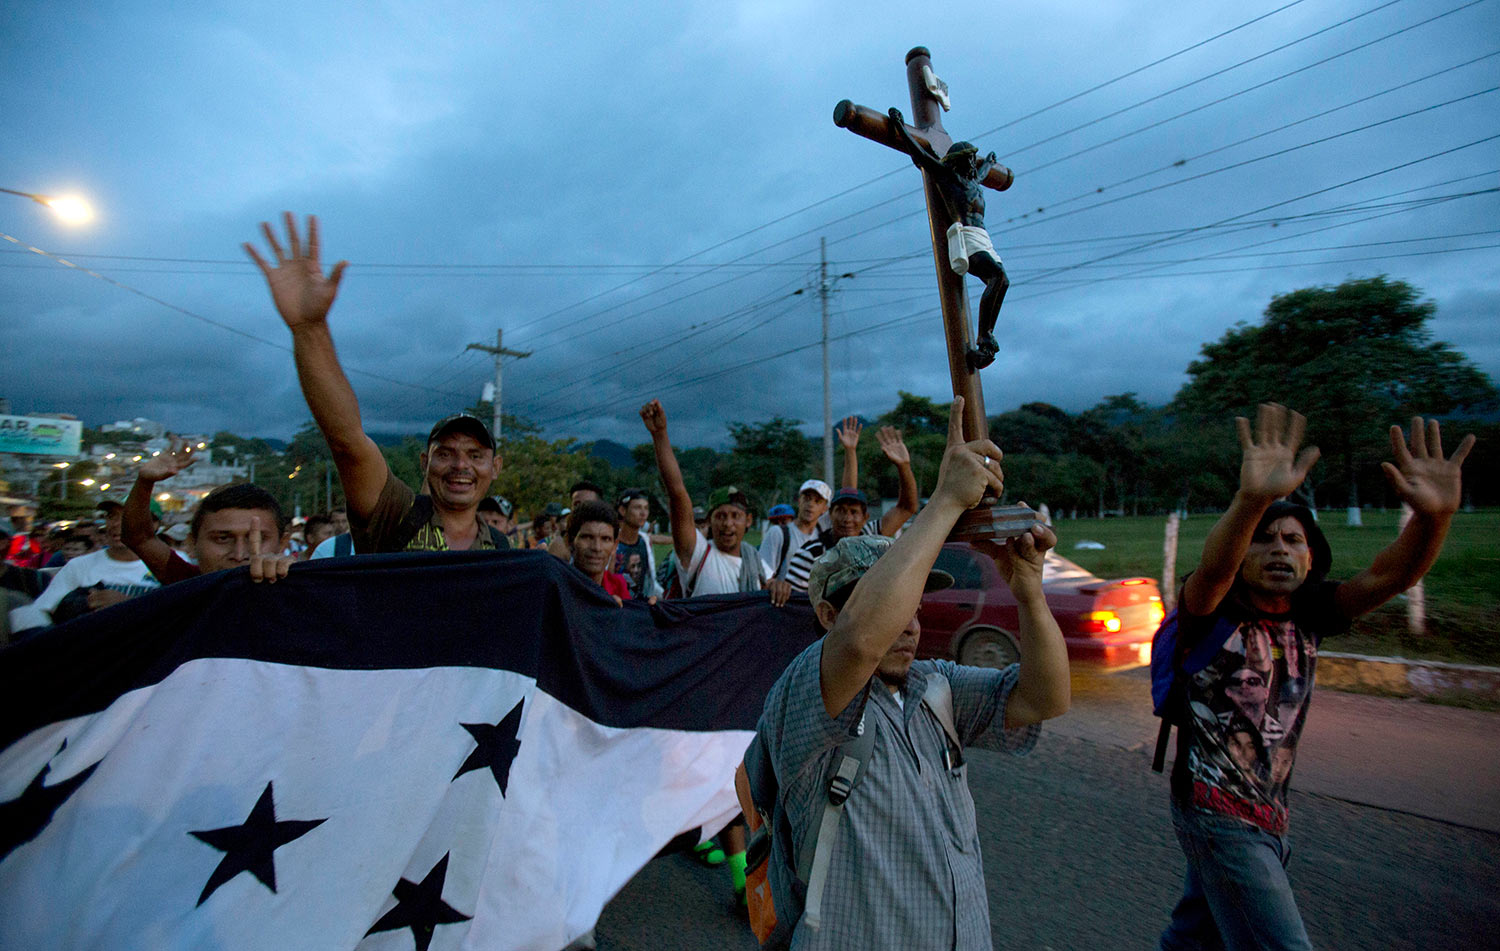  A Honduran migrant holds up a replica of the Black Christ of Esquipulas as a caravan of migrants making their way to the U.S. arrives to Esquipulas, Guatemala, Monday, Oct. 15, 2018. (AP Photo/Moises Castillo) 